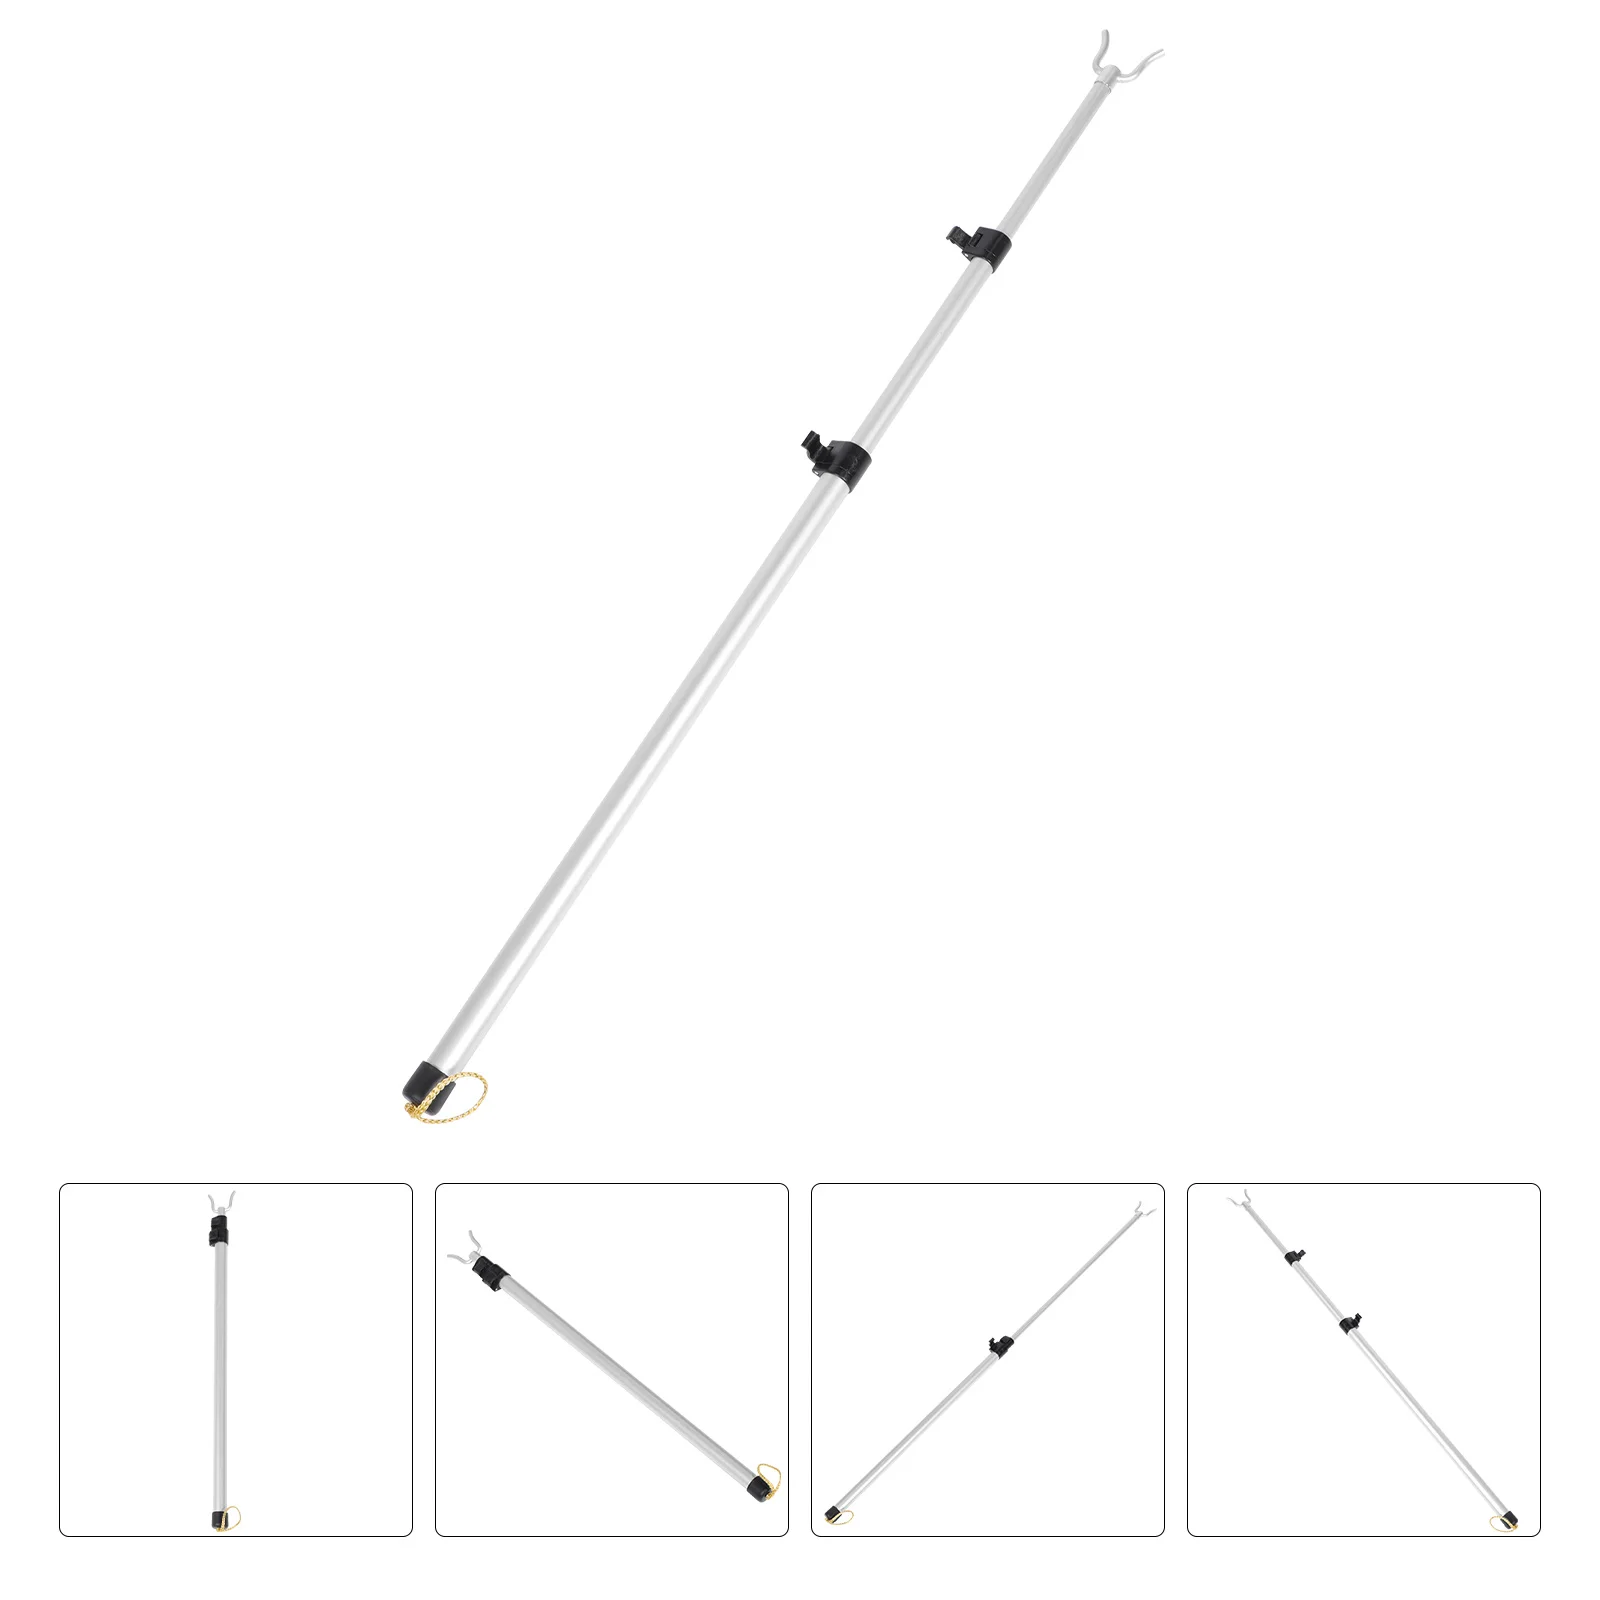 https://ae01.alicdn.com/kf/S5ae55b1bf623477d8abff65e3b7166b2h/Pole-Closet-Clothes-Hook-Rod-Stick-Telescoping-Reach-Retractable-Hanger-Garment-Clothesline-With-For-Reaching-Clothing.jpg